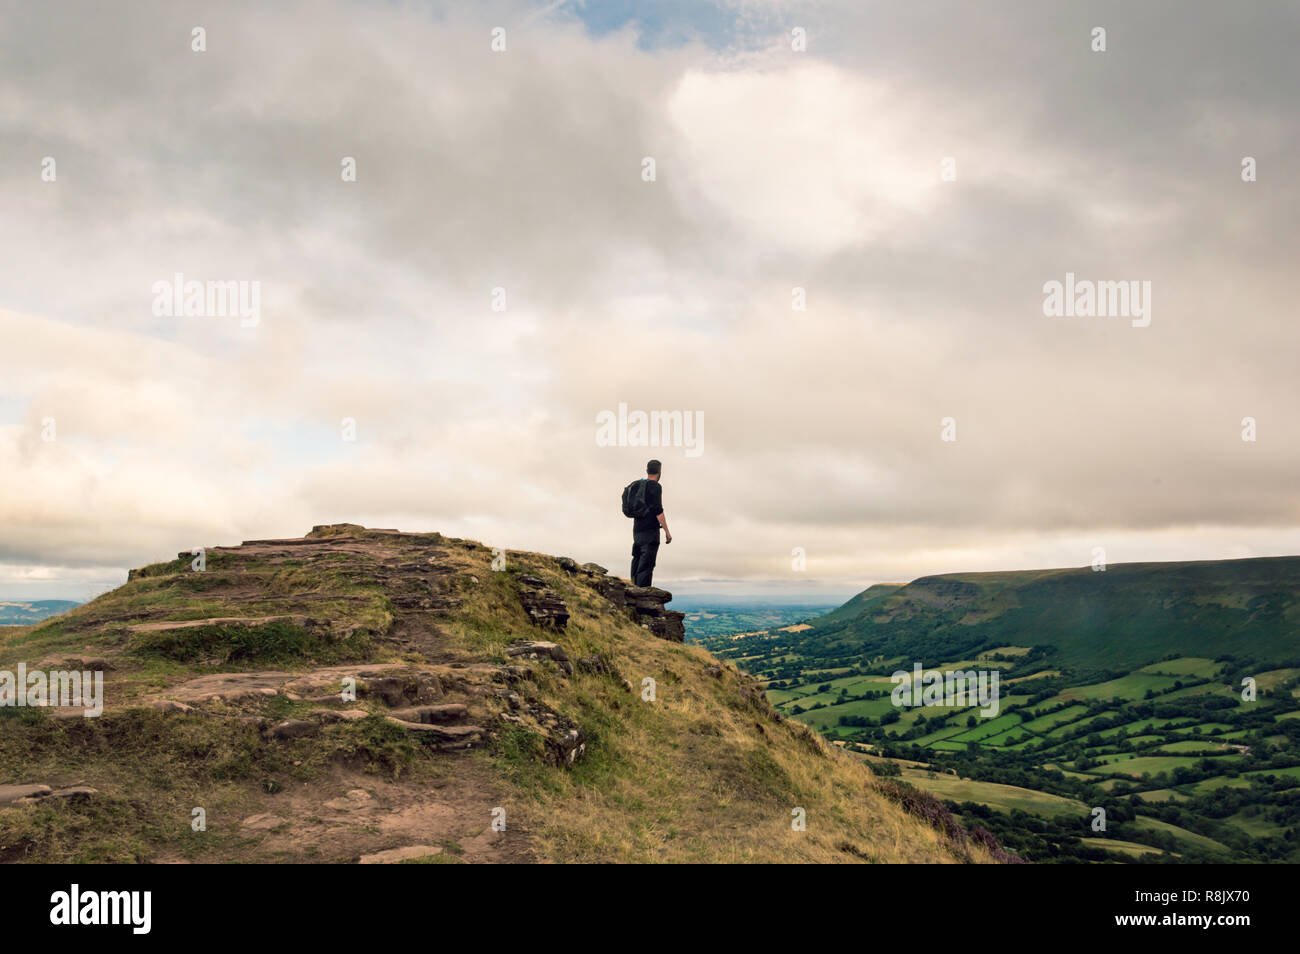 A man with a rucksack looking across the landscape of fields and hills from the top of a hill on the English, Welsh border. Black Mountains, Wales. Stock Photo